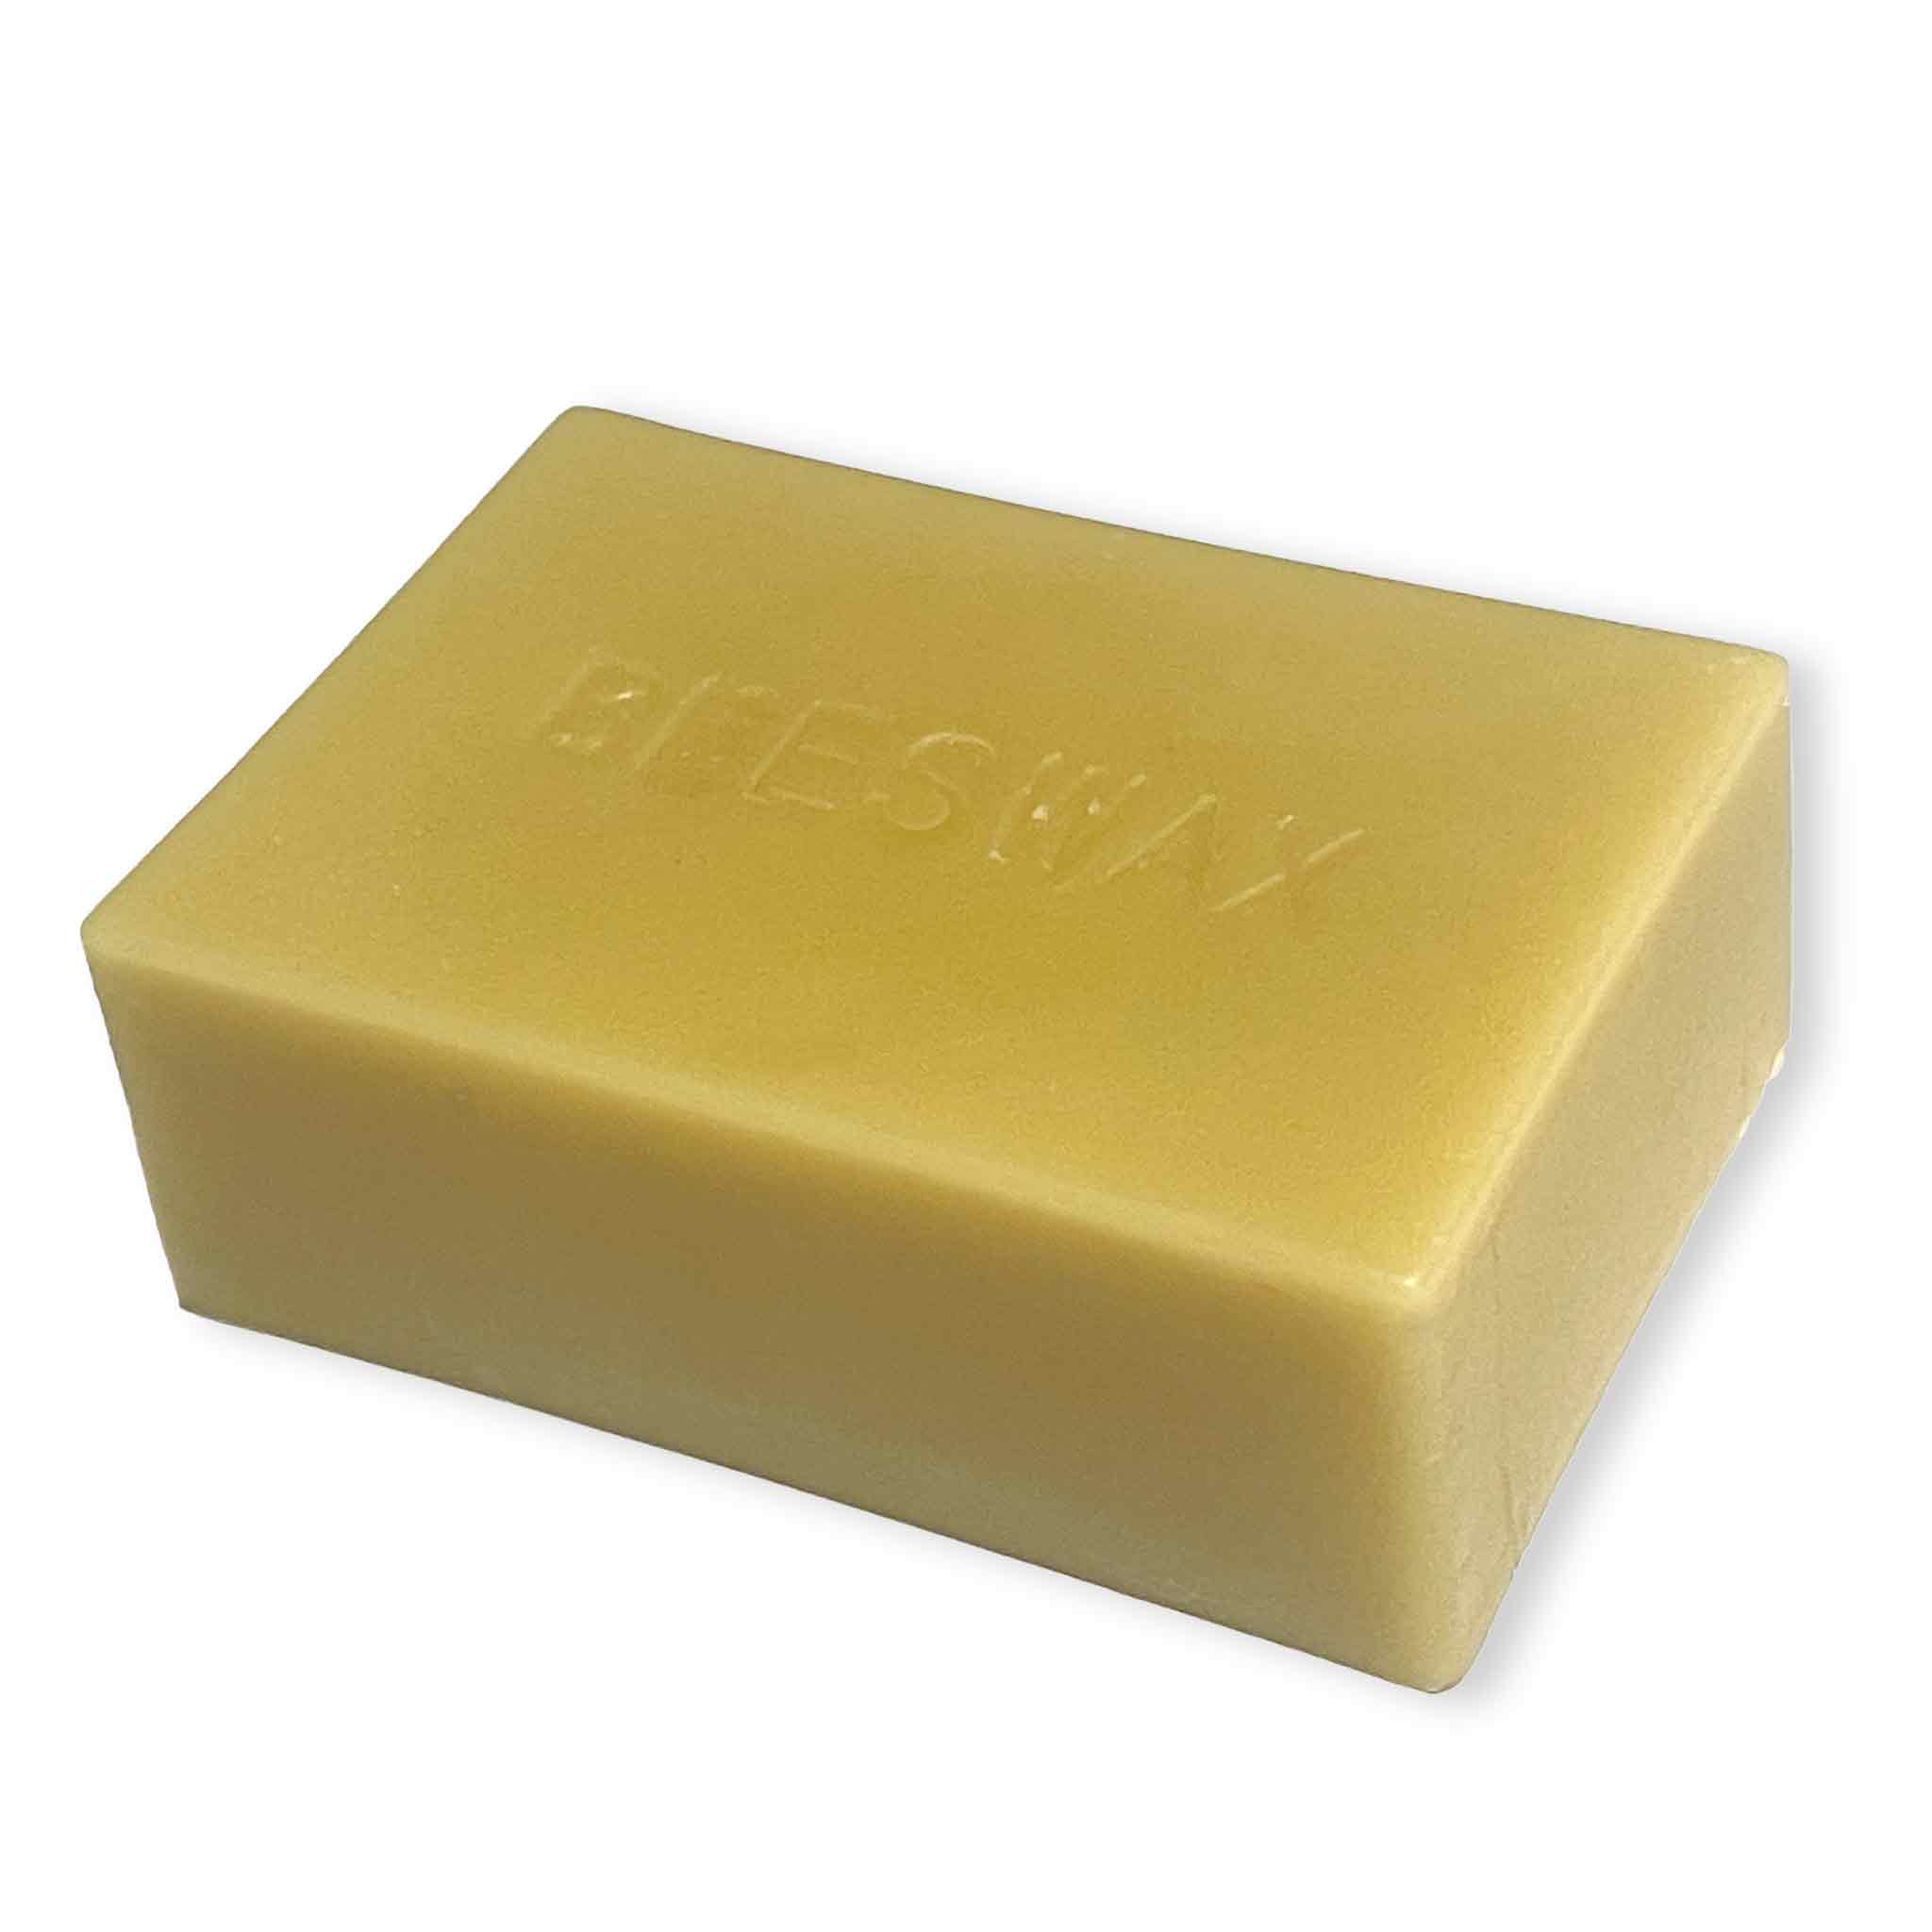 Pure 100% Australian Beewax - Large Bar - Bee Products collection by Buzzbee Beekeeping Supplies